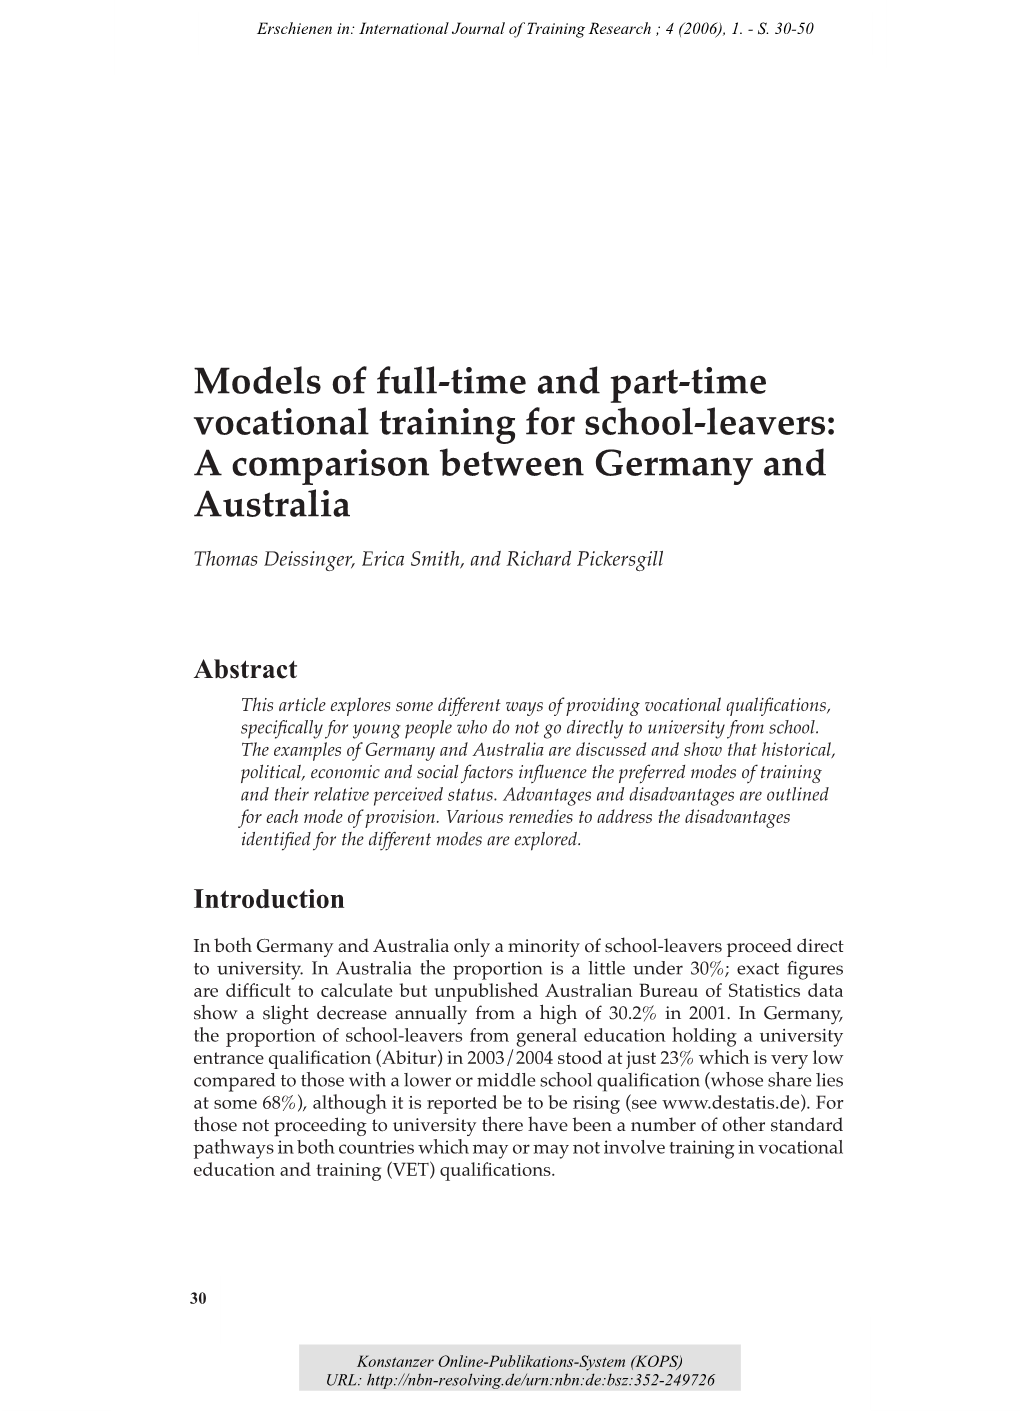 Models of Full-Time and Part-Time Vocational Training for School-Leavers: a Comparison Between Germany and Australia